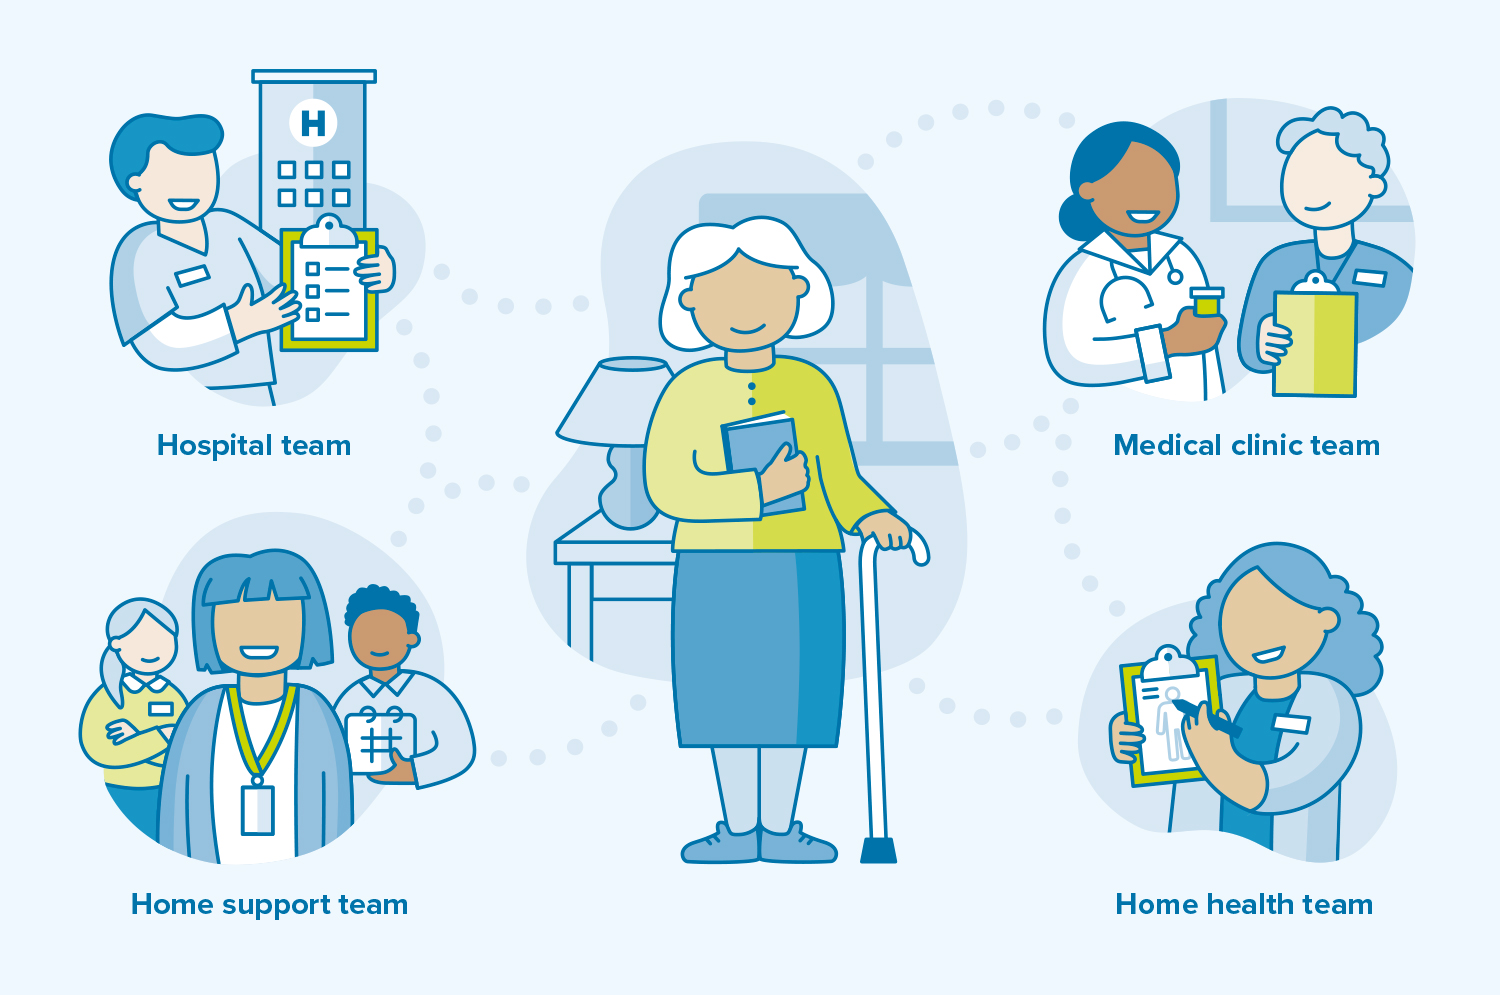 Home support care team illustration by Sarah Eno